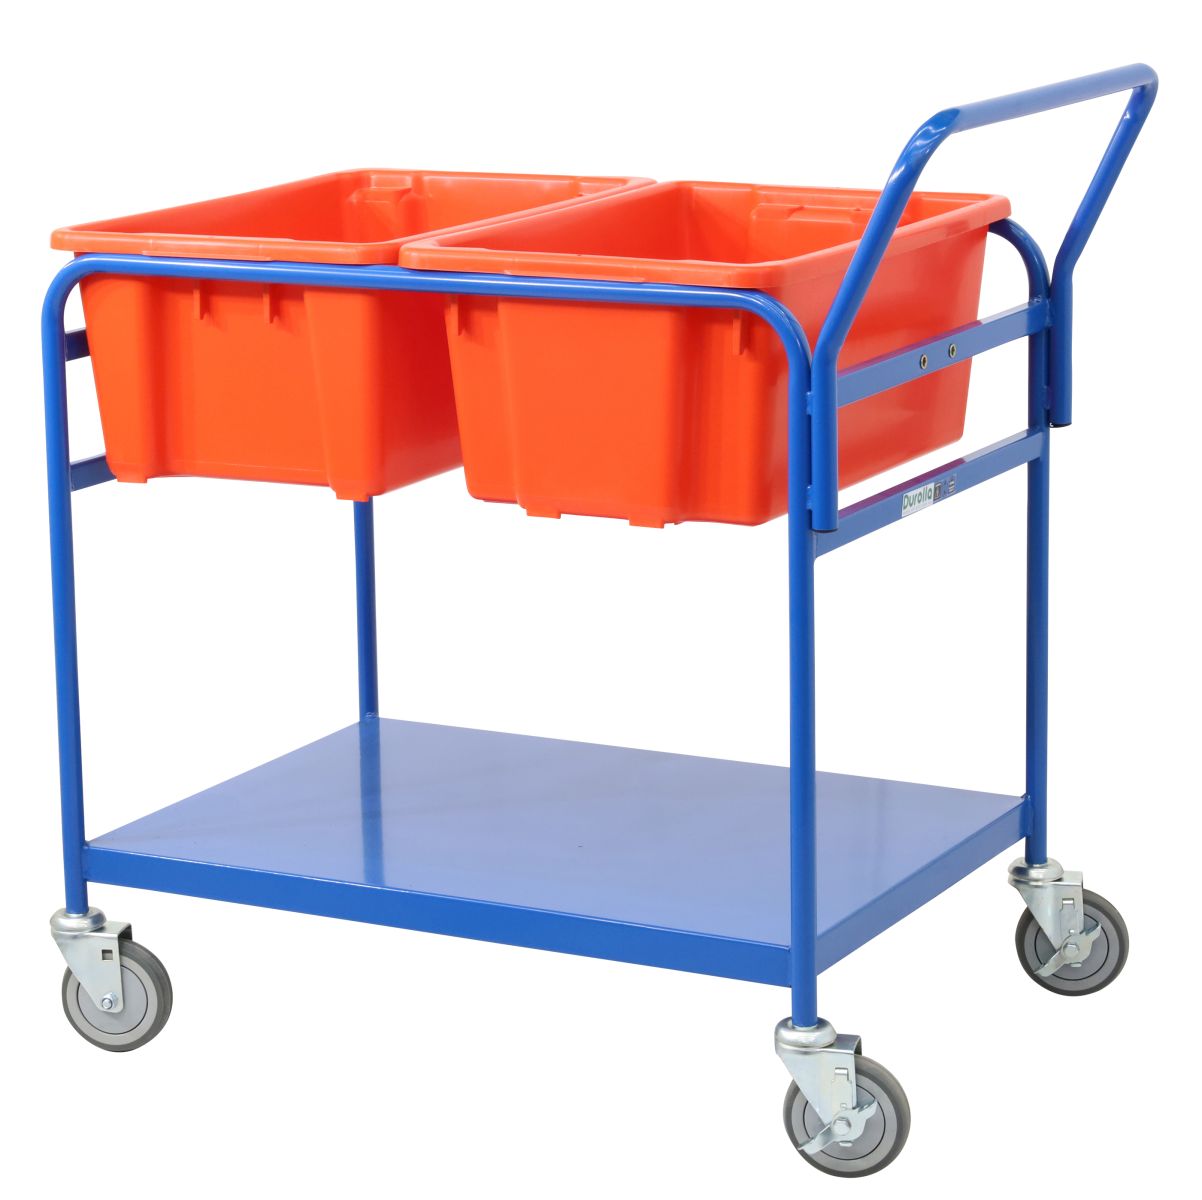 Fully Welded Double Tub Order Picking Trolley 